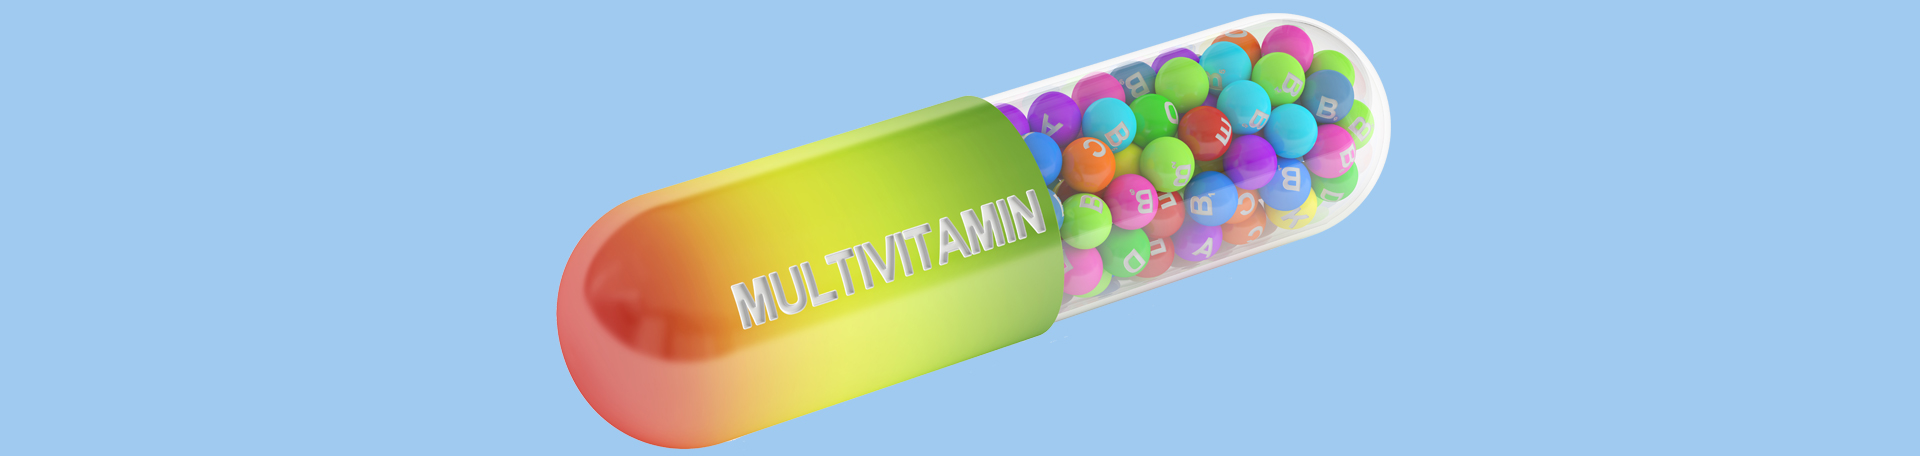 Baton Rouge multivitamin picture to demonstrate benefits for memory and cognition